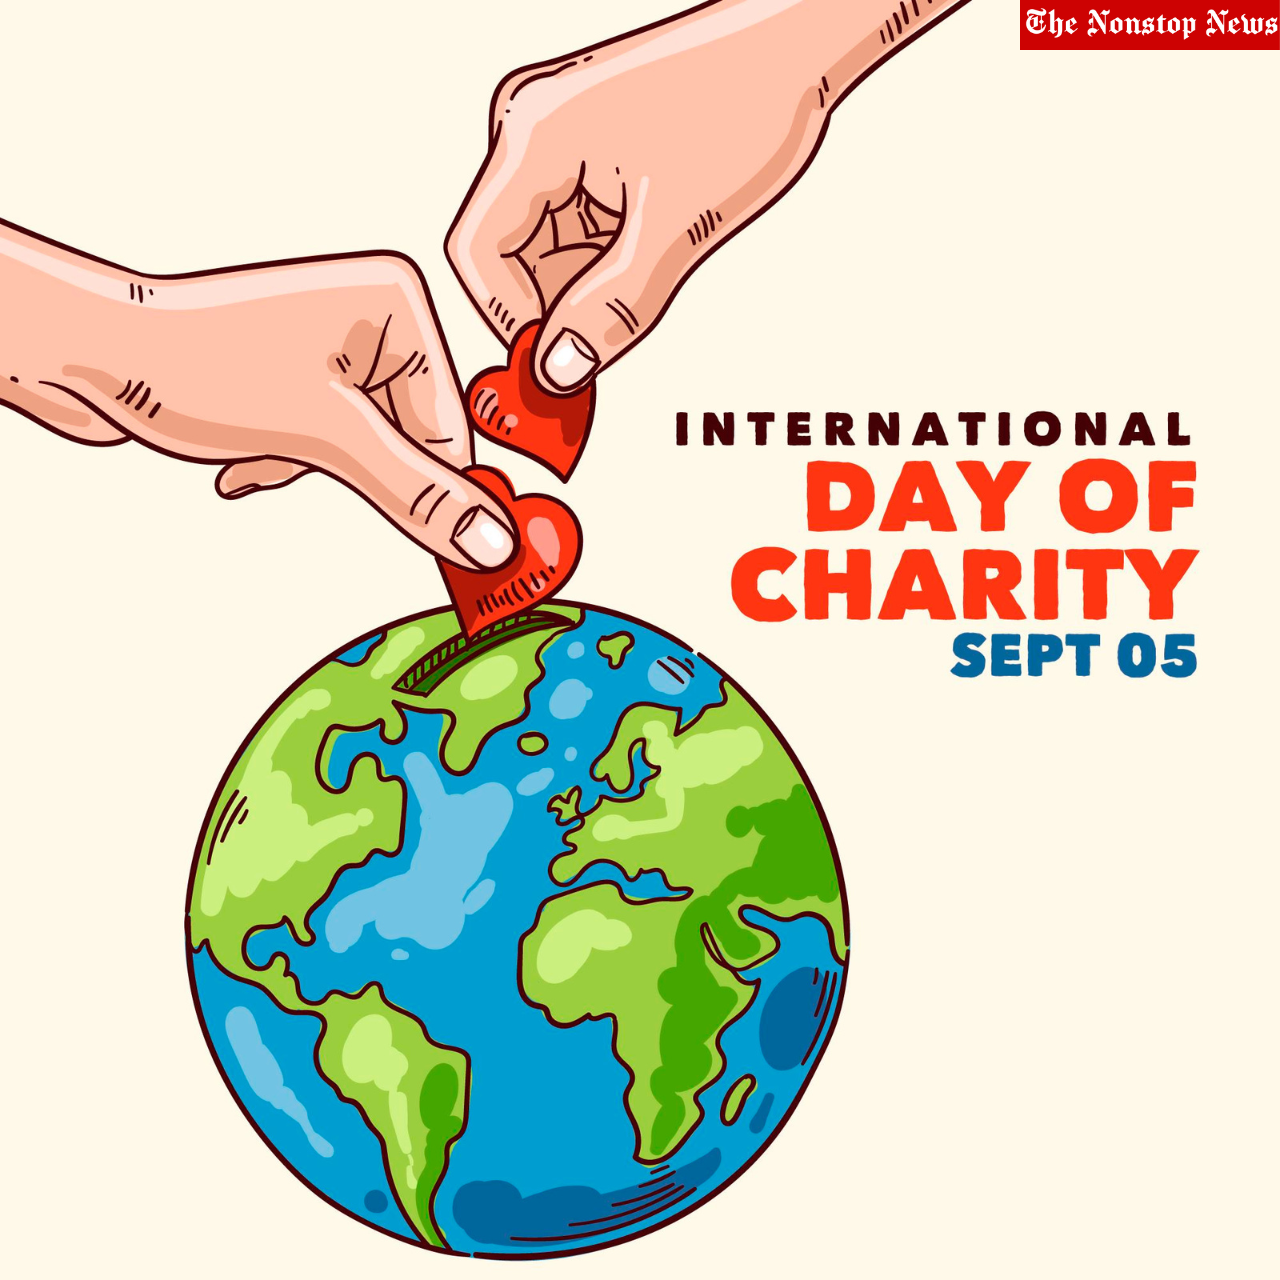 International Day of Charity 2022: Theme, Quotes, Images, Messages, Greetings, Pics, Slogans to share